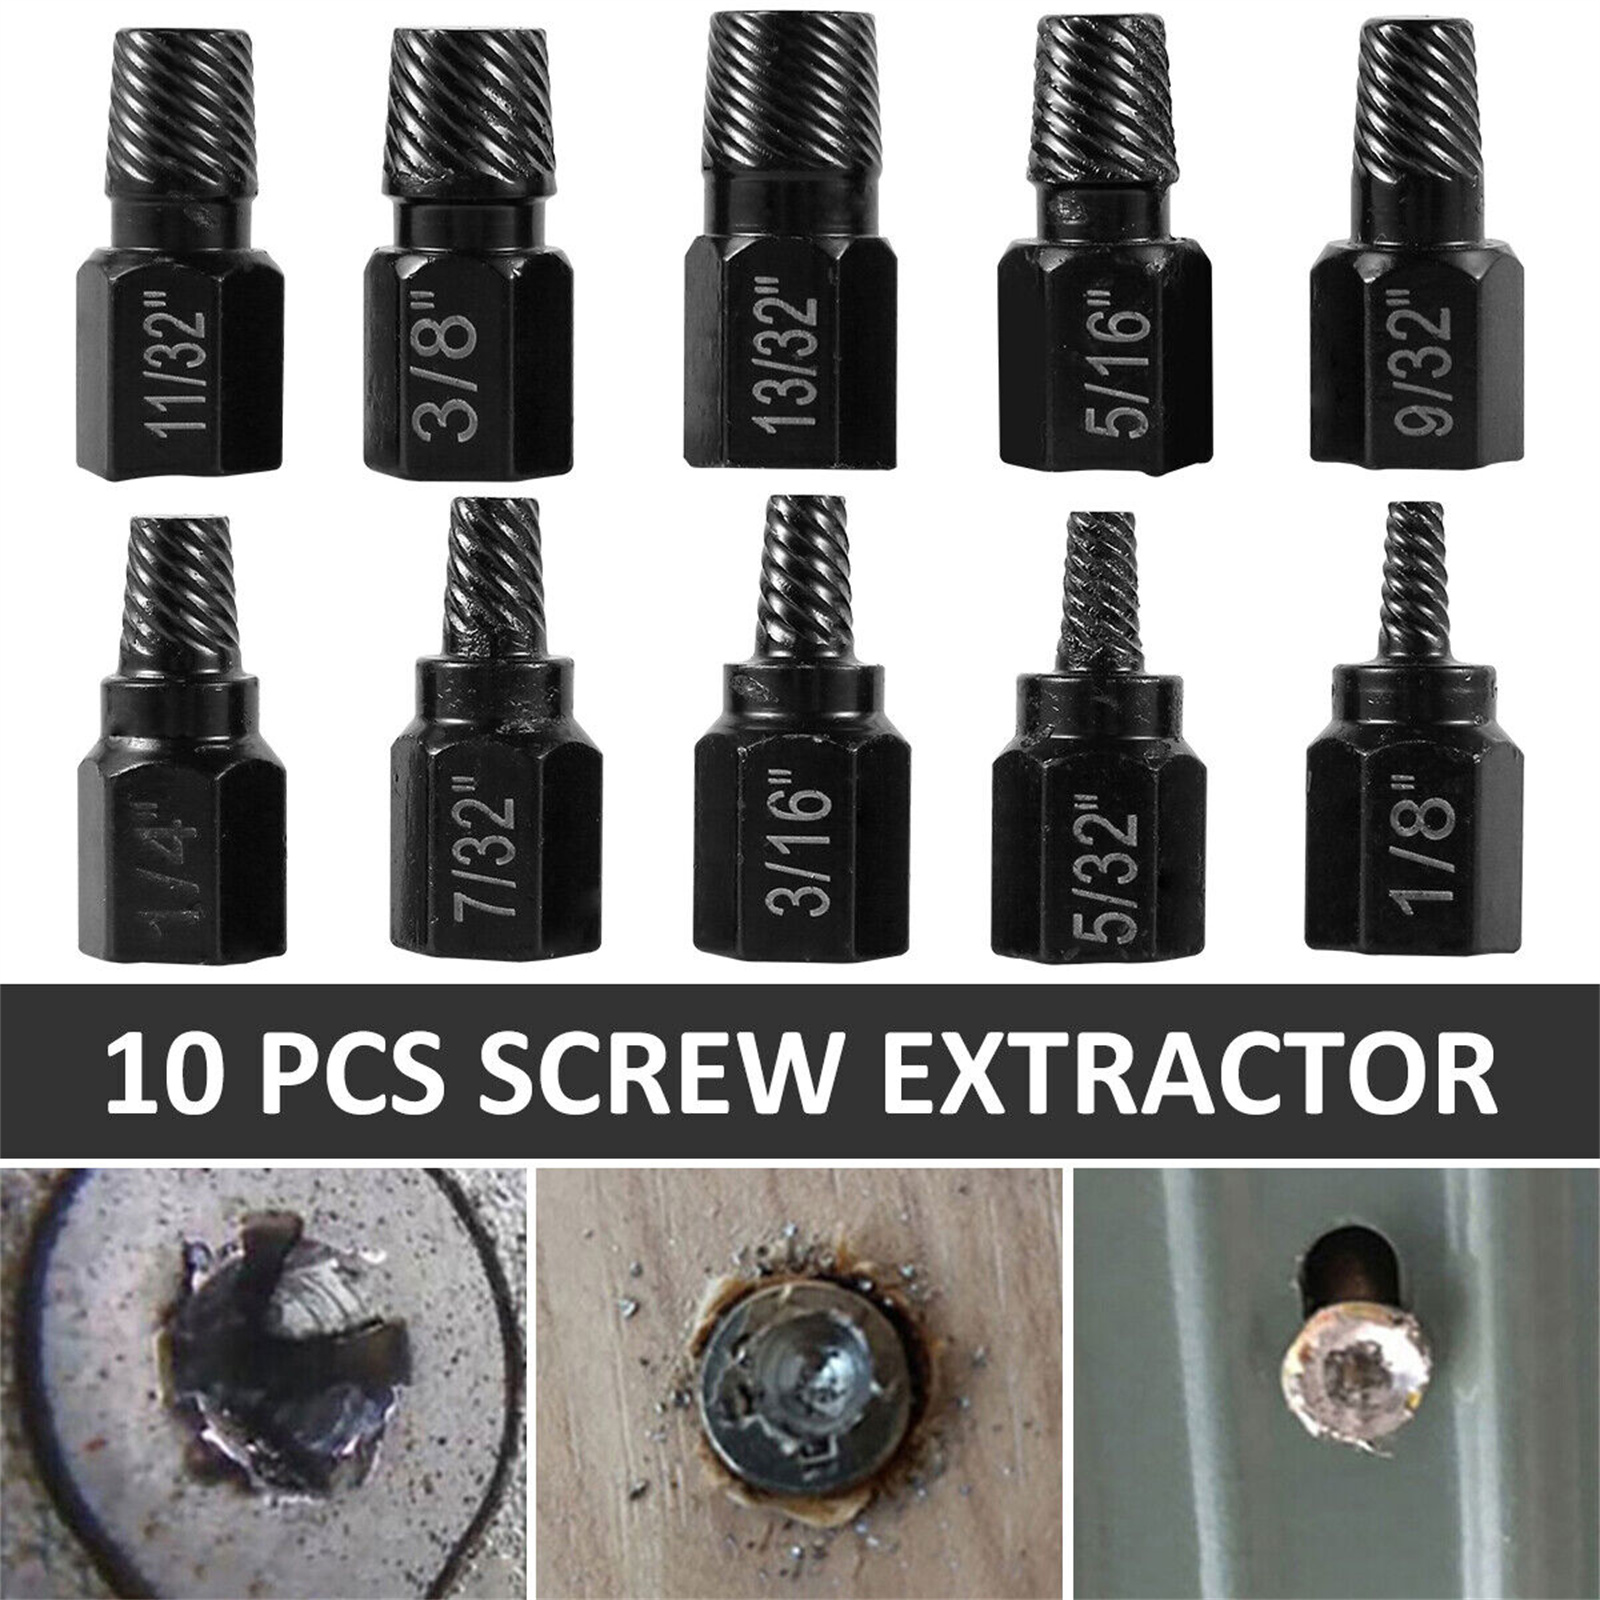 10Pcs Screw Extractor Alloy Steel Damaged Screw Remover Set For Broken Rounded Off Painted Over Rusted Tight Bolts Set of 10 screw extractors